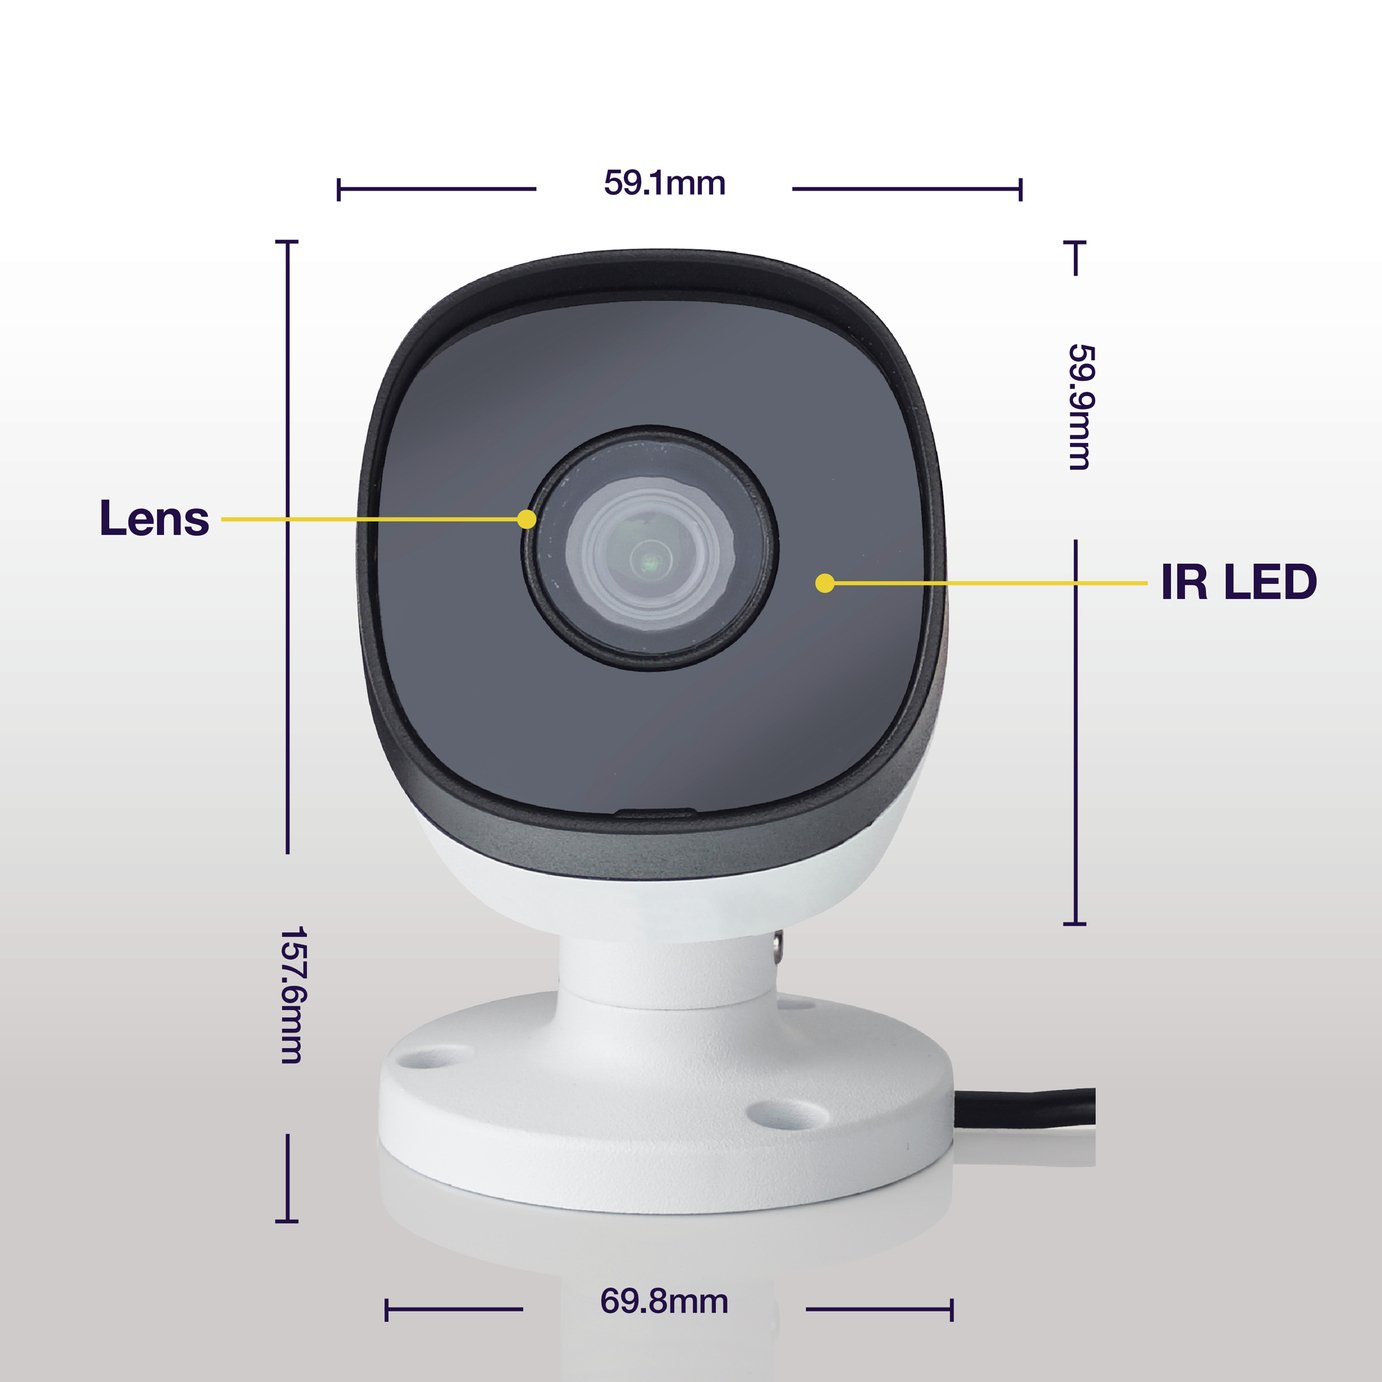 Yale Full HD1080p Wired Outdoor Camera Review